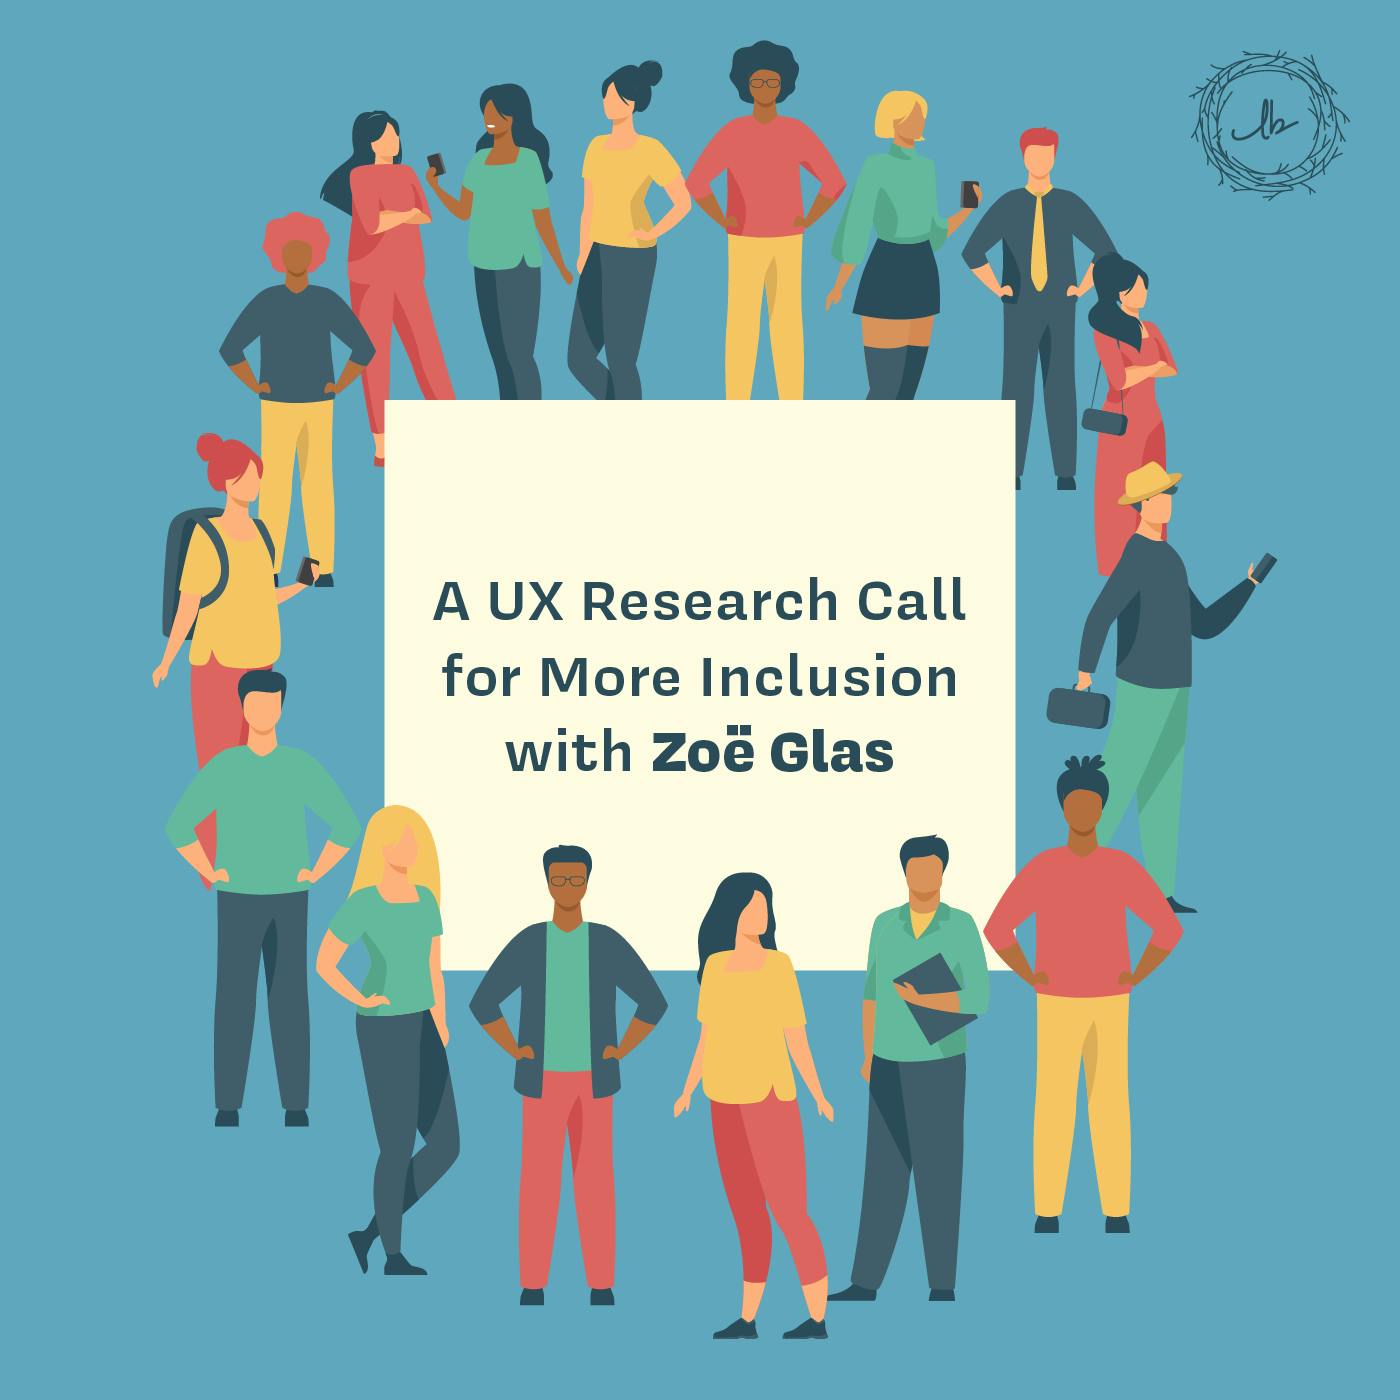 A UX Research Call for More Inclusion with Zoë Glas